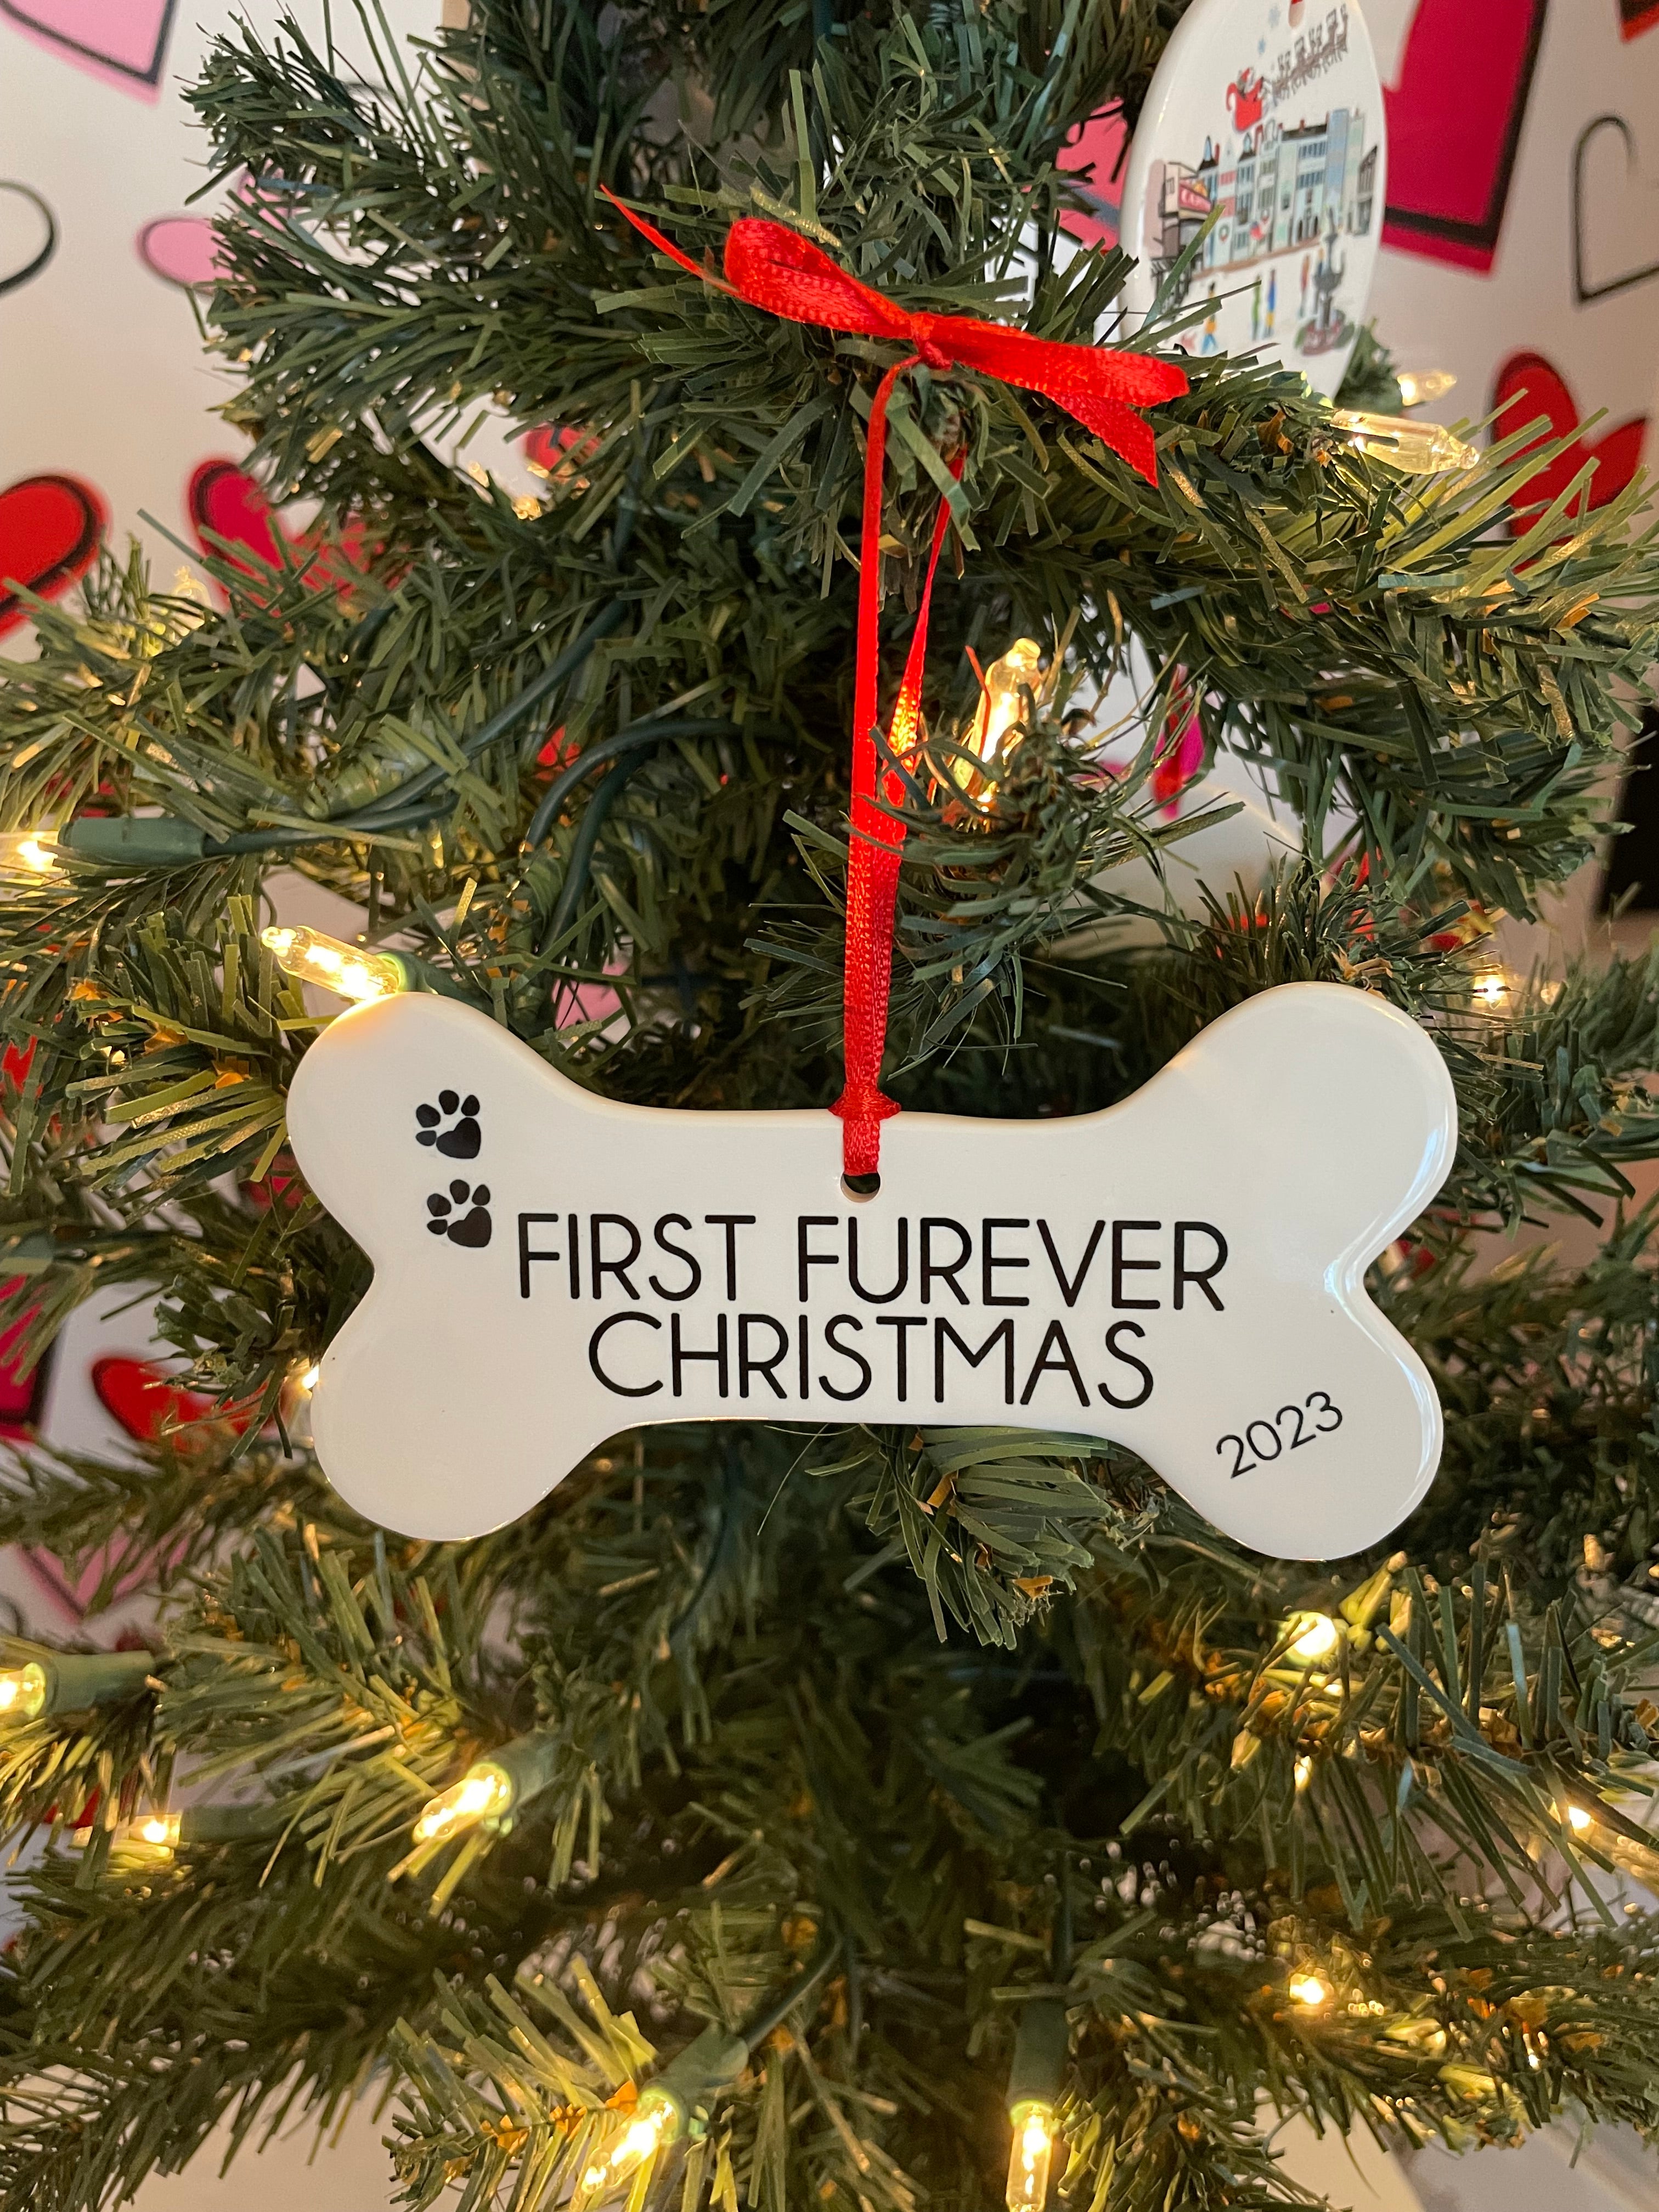 First Furever Christmas - Dog's First Christmas, 2023 Ornament